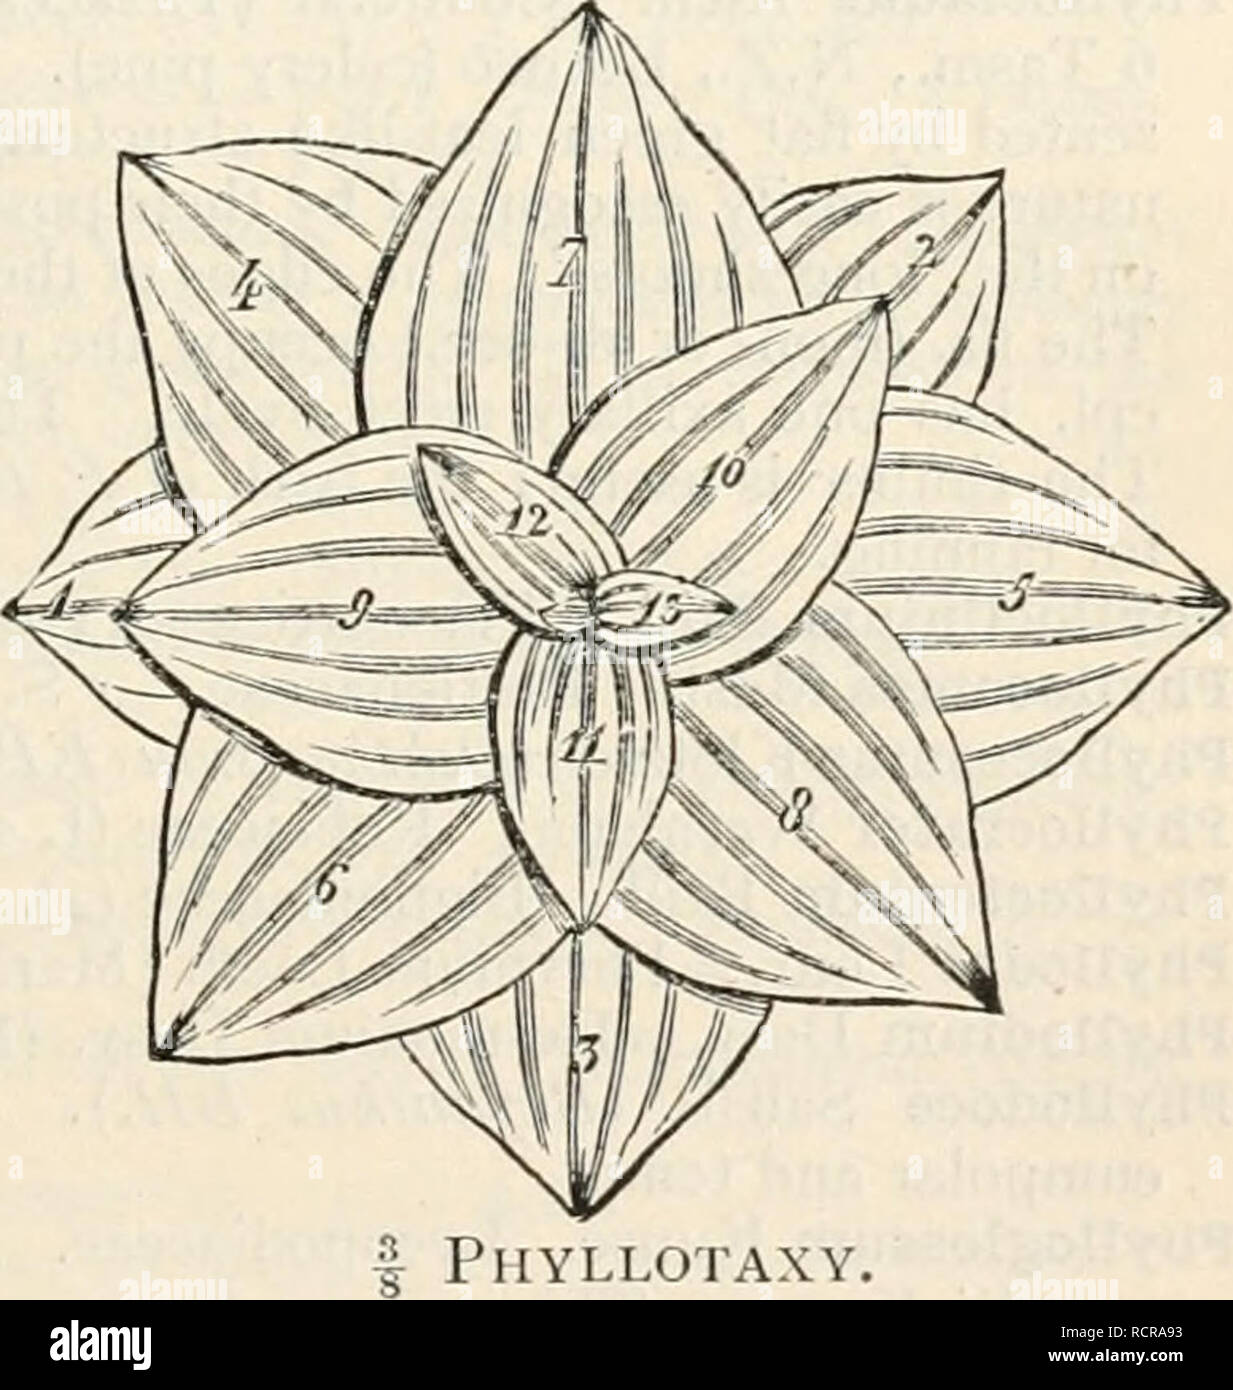 . A dictionary of the flowering plants and ferns. Botany. PHYLLO- 5°7 Phyllarthron DC. Bignoniaceae (4). 6 Madag., Mascarenes. The 1. is reduced to a jointed winged petiole. Phyllepidum Rafin. Amarantaceae (inc. sed.). Gen. dubium. i N. Am. Phyllis L. Rubiaceae (n. 7). i Canaries, Madeira. Phyllitis Ludwig. Polypodiaceae. 10 trop. and subtrop. Phyllo- (Gr. pref.), -phyllous (suff.), leaf; -clade, a stem structure usu. ± flattened and serving 1. purposes, Asparagus, Baccharis, Bos- siaea, Carmichaelia, ffibbertia, Lathyrus, Leinna, Miiehlenbeckia, Oxalis, Phyllanthus, Phyllocladns, RHSCHS, Seme Stock Photo